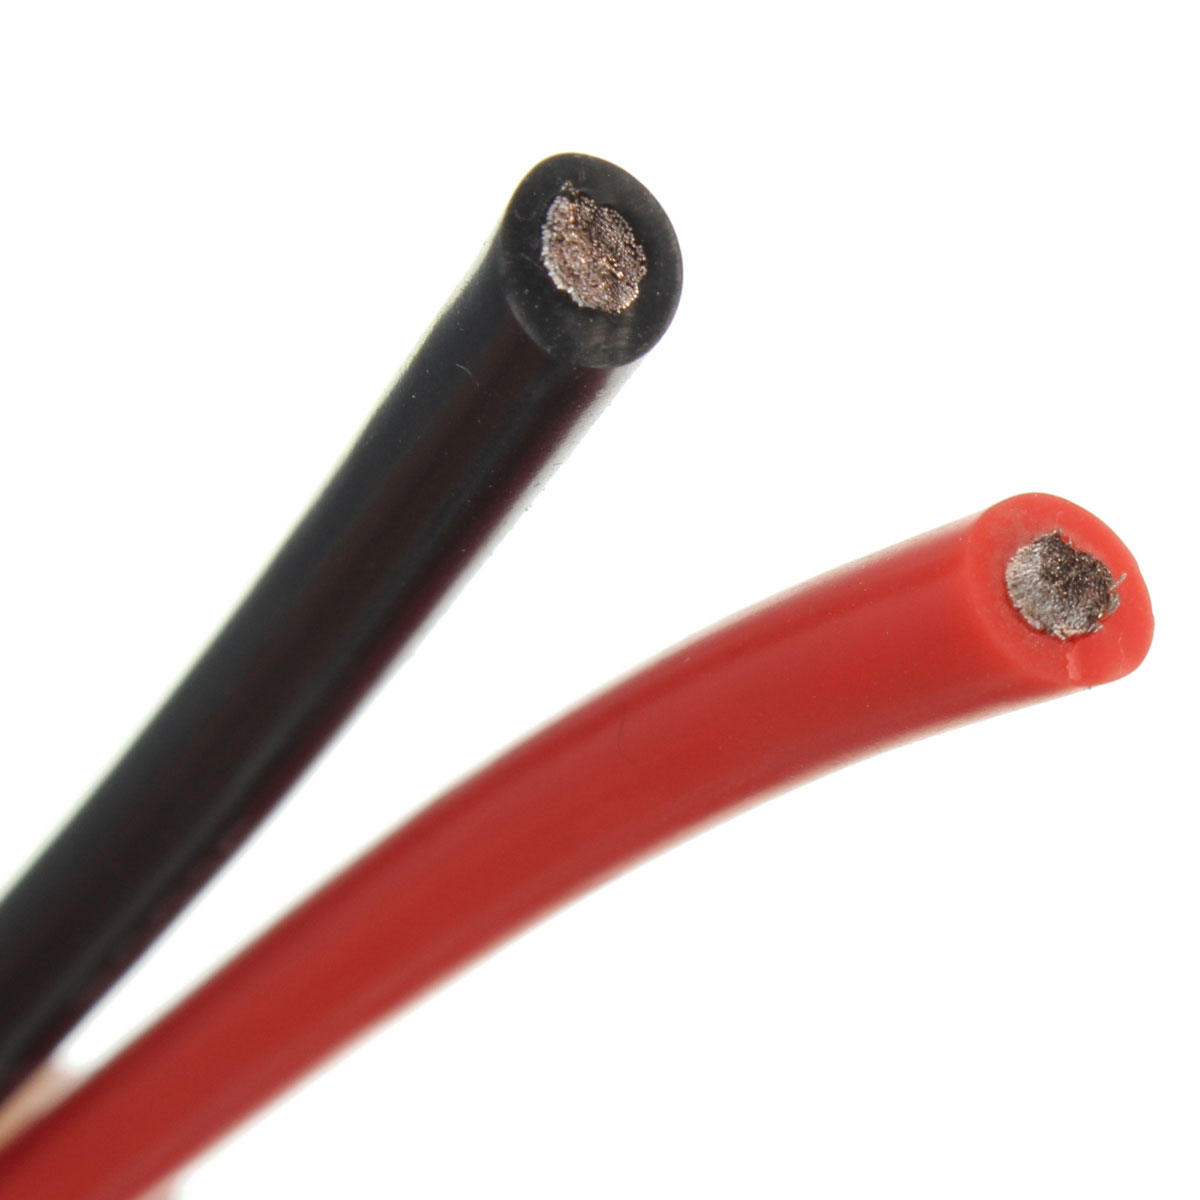 12AWG-3m-Gauge-Silicone-Wire-Flexible-Stranded-BlackRed-Copper-Cable-F-RC-983012-9